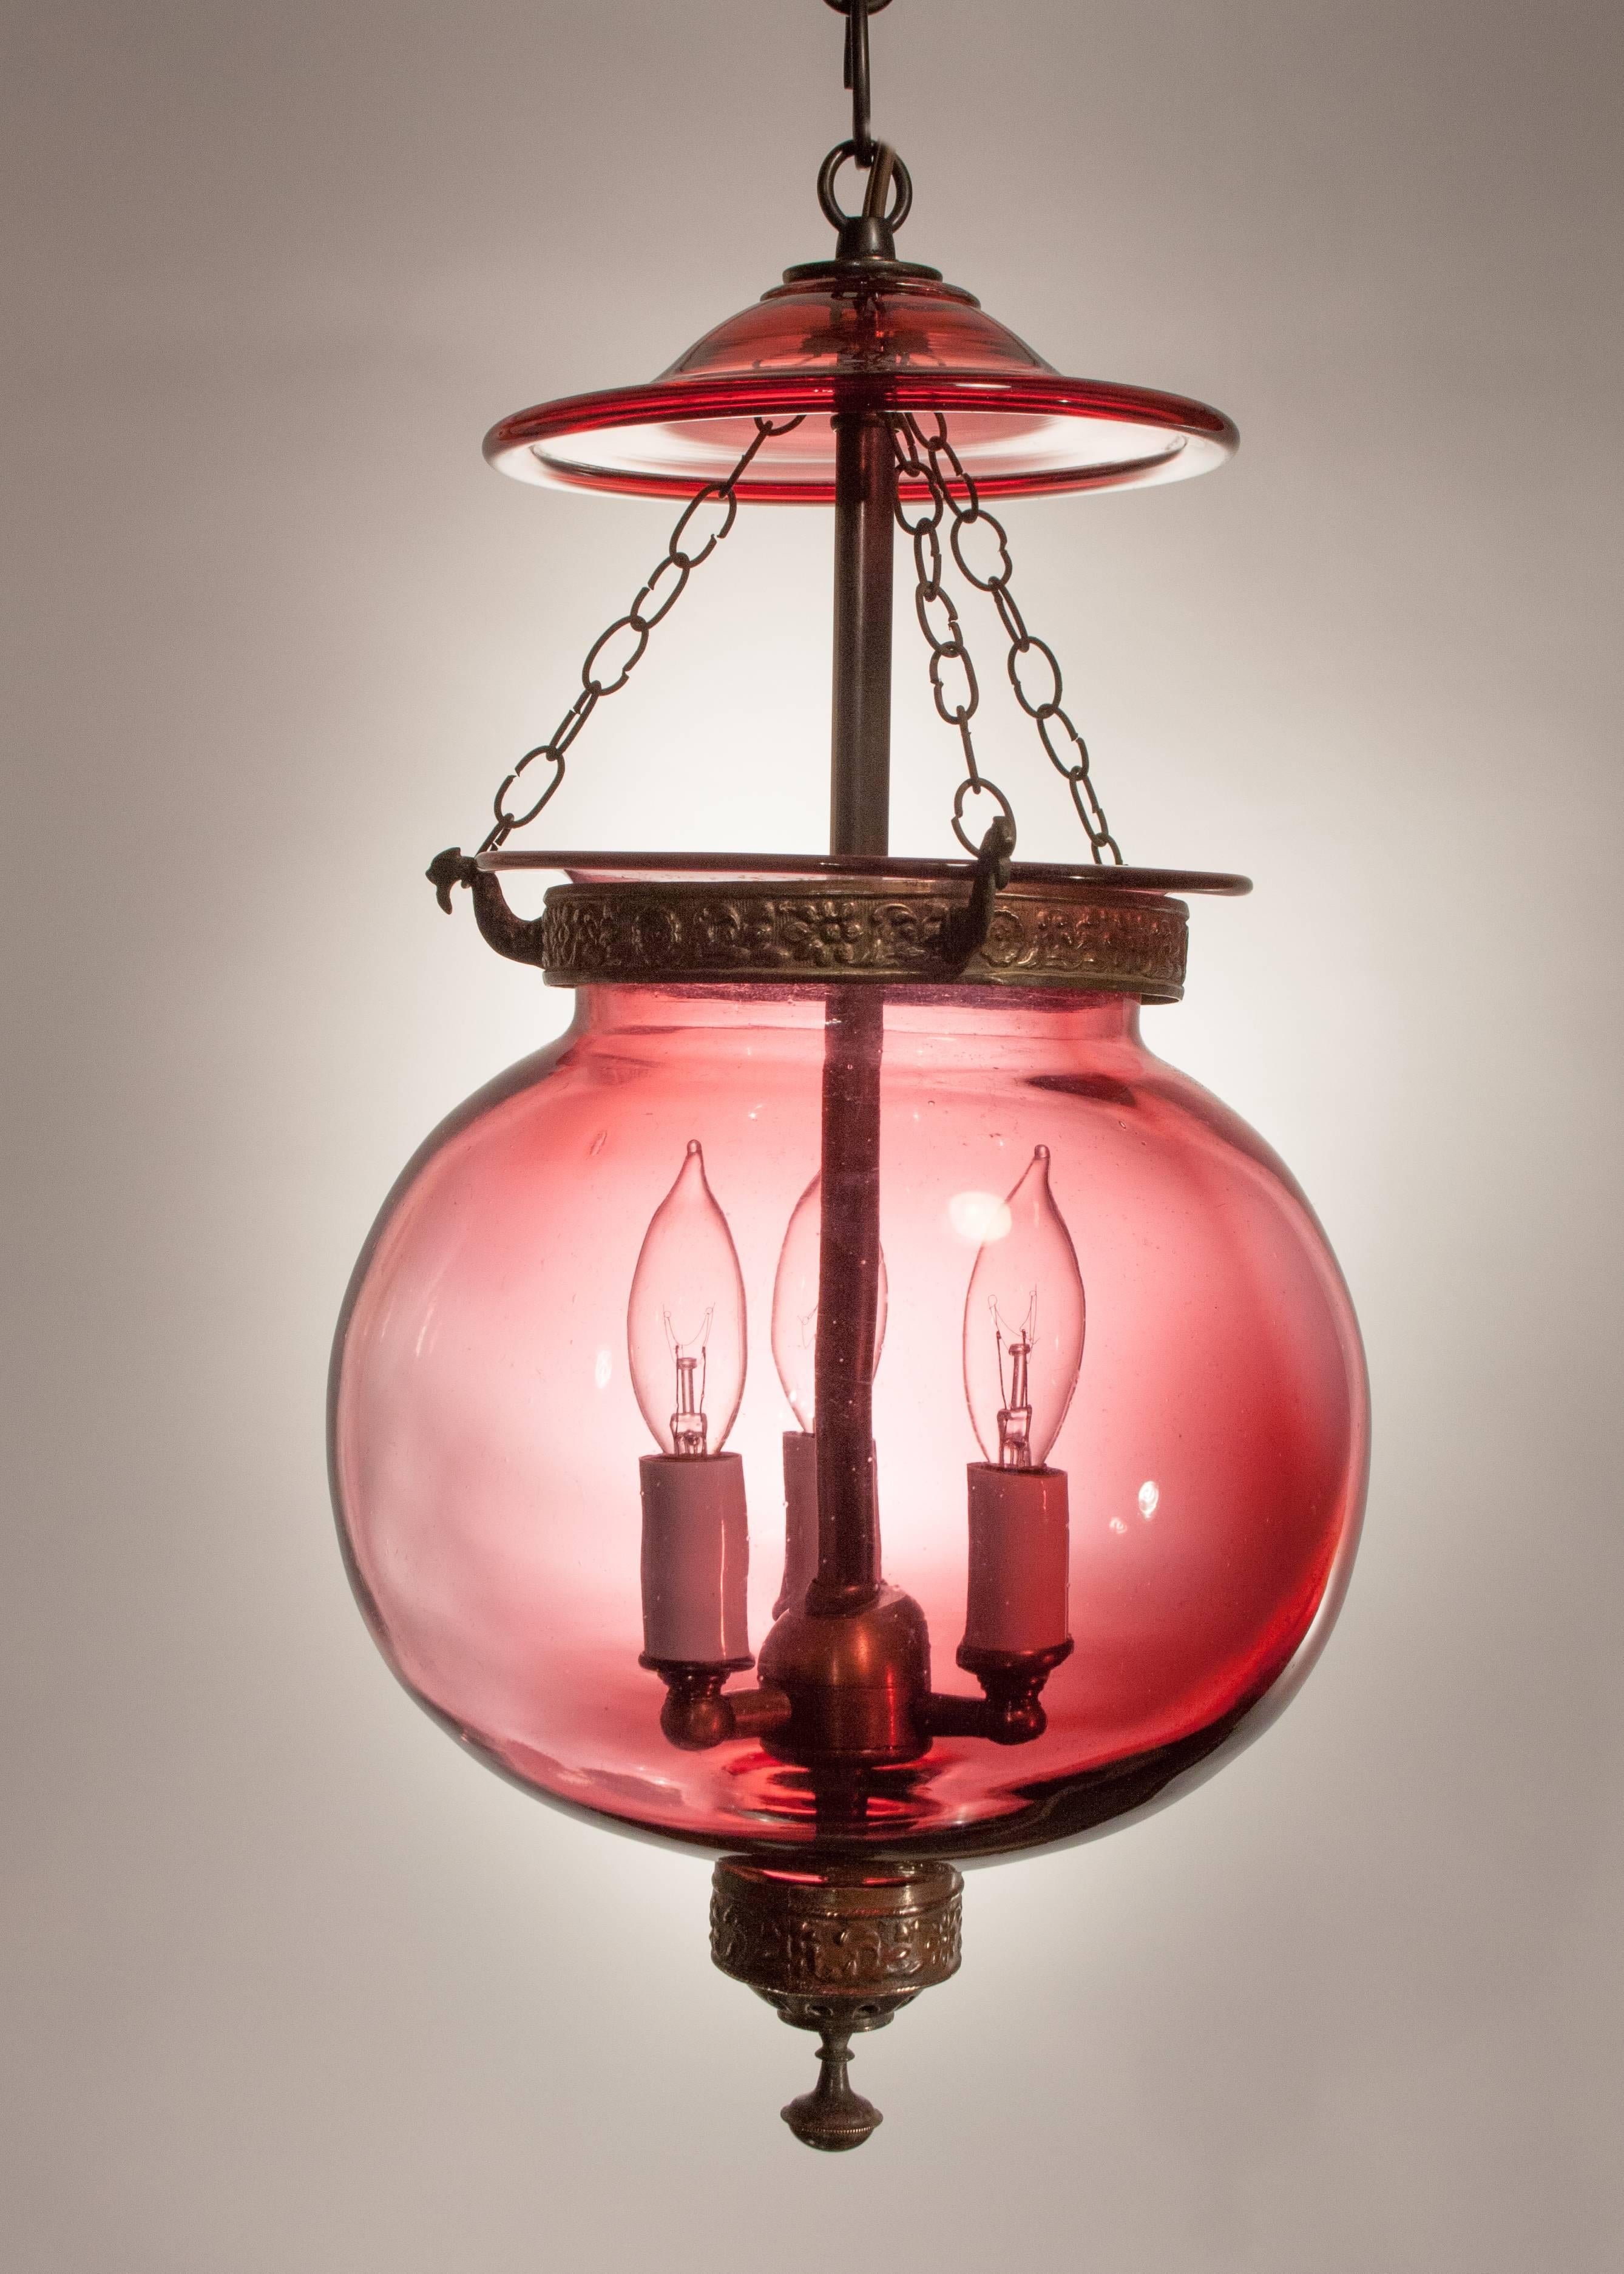 Cranberry red globe bell jar lantern, circa 1860, with lovely form and tonal gradations consistent with the quality and age of the hand blown glass. This English hall lantern has its original smoke bell, as well as decorative brass band and finial.